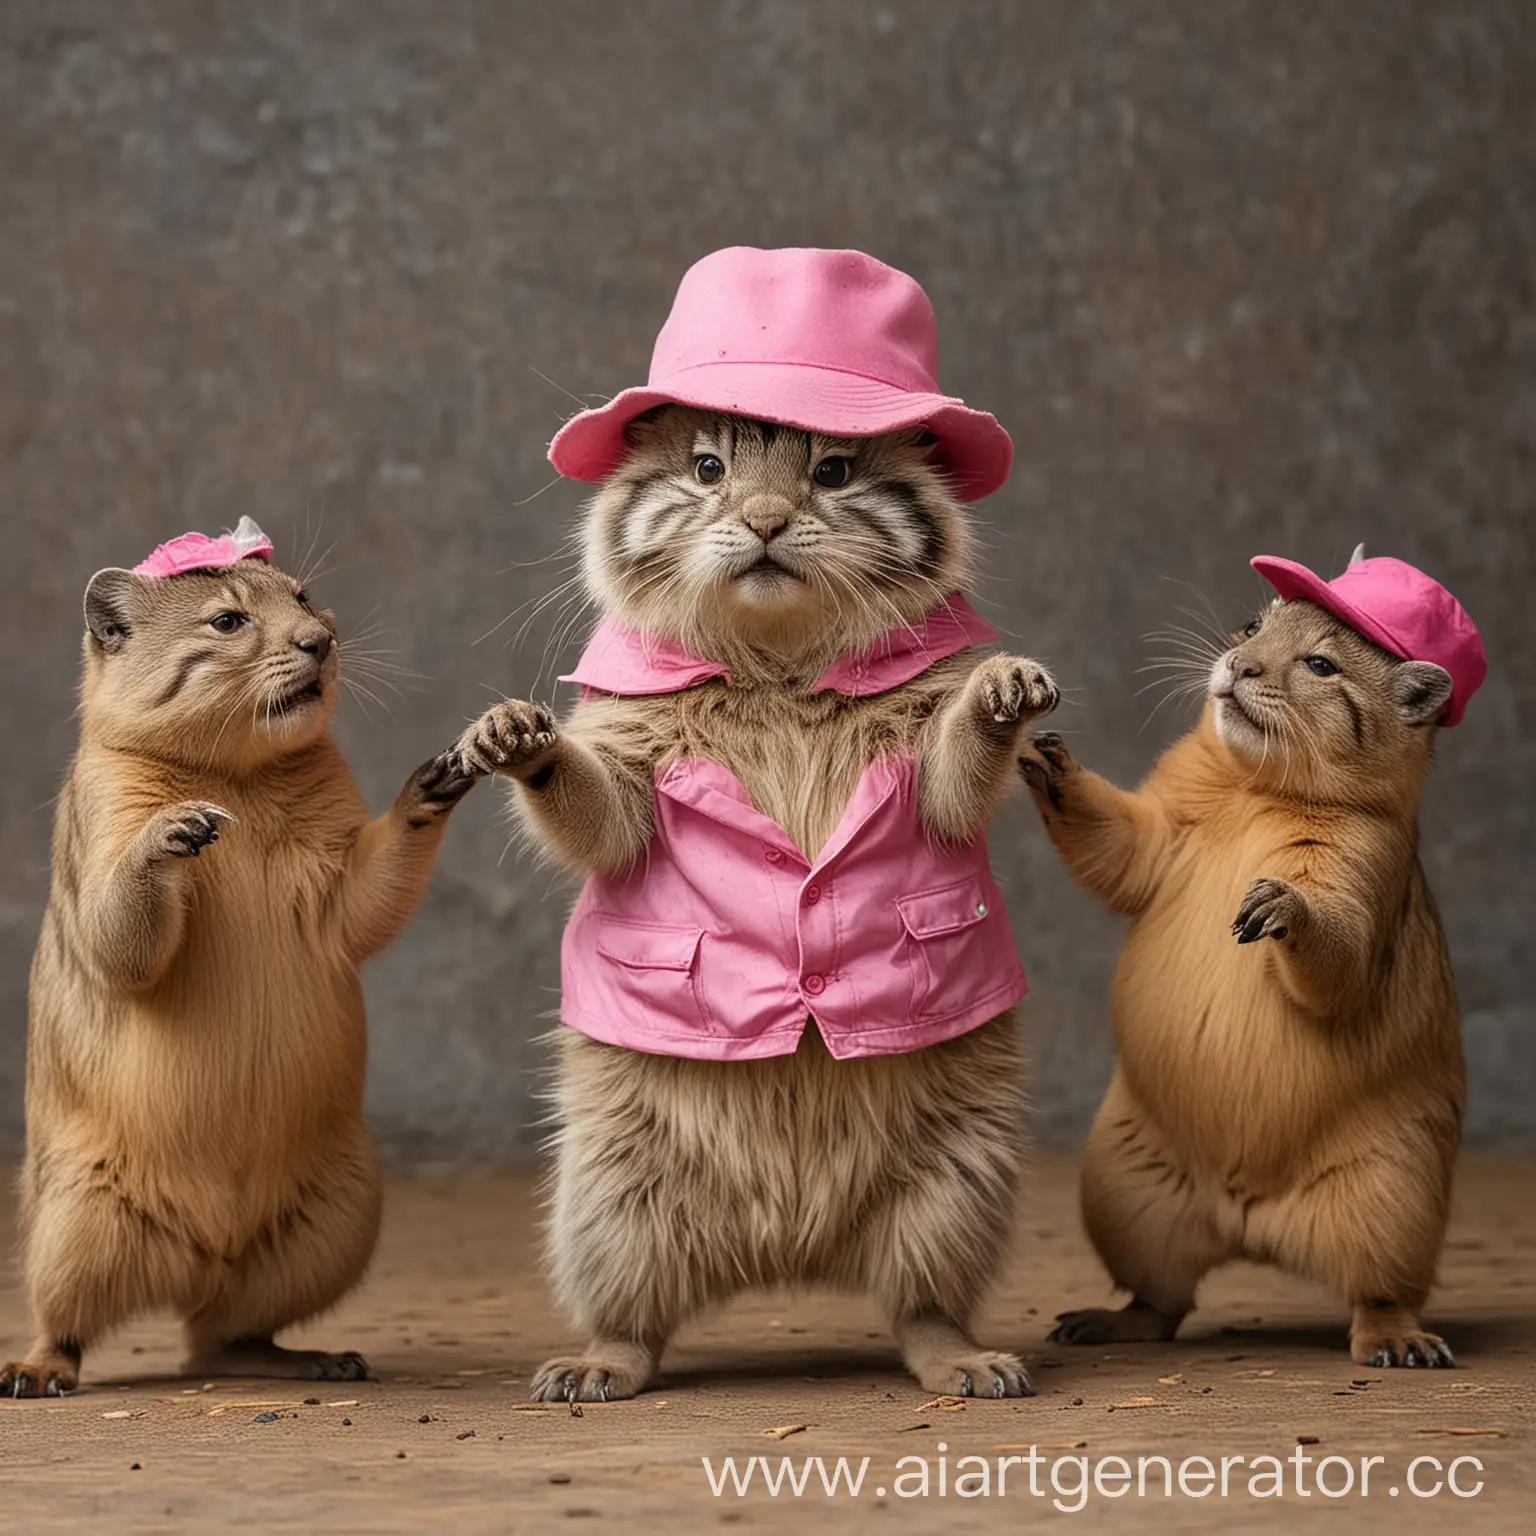 Playful-Pallas-Cat-in-Pink-Hat-Dancing-with-Capybara